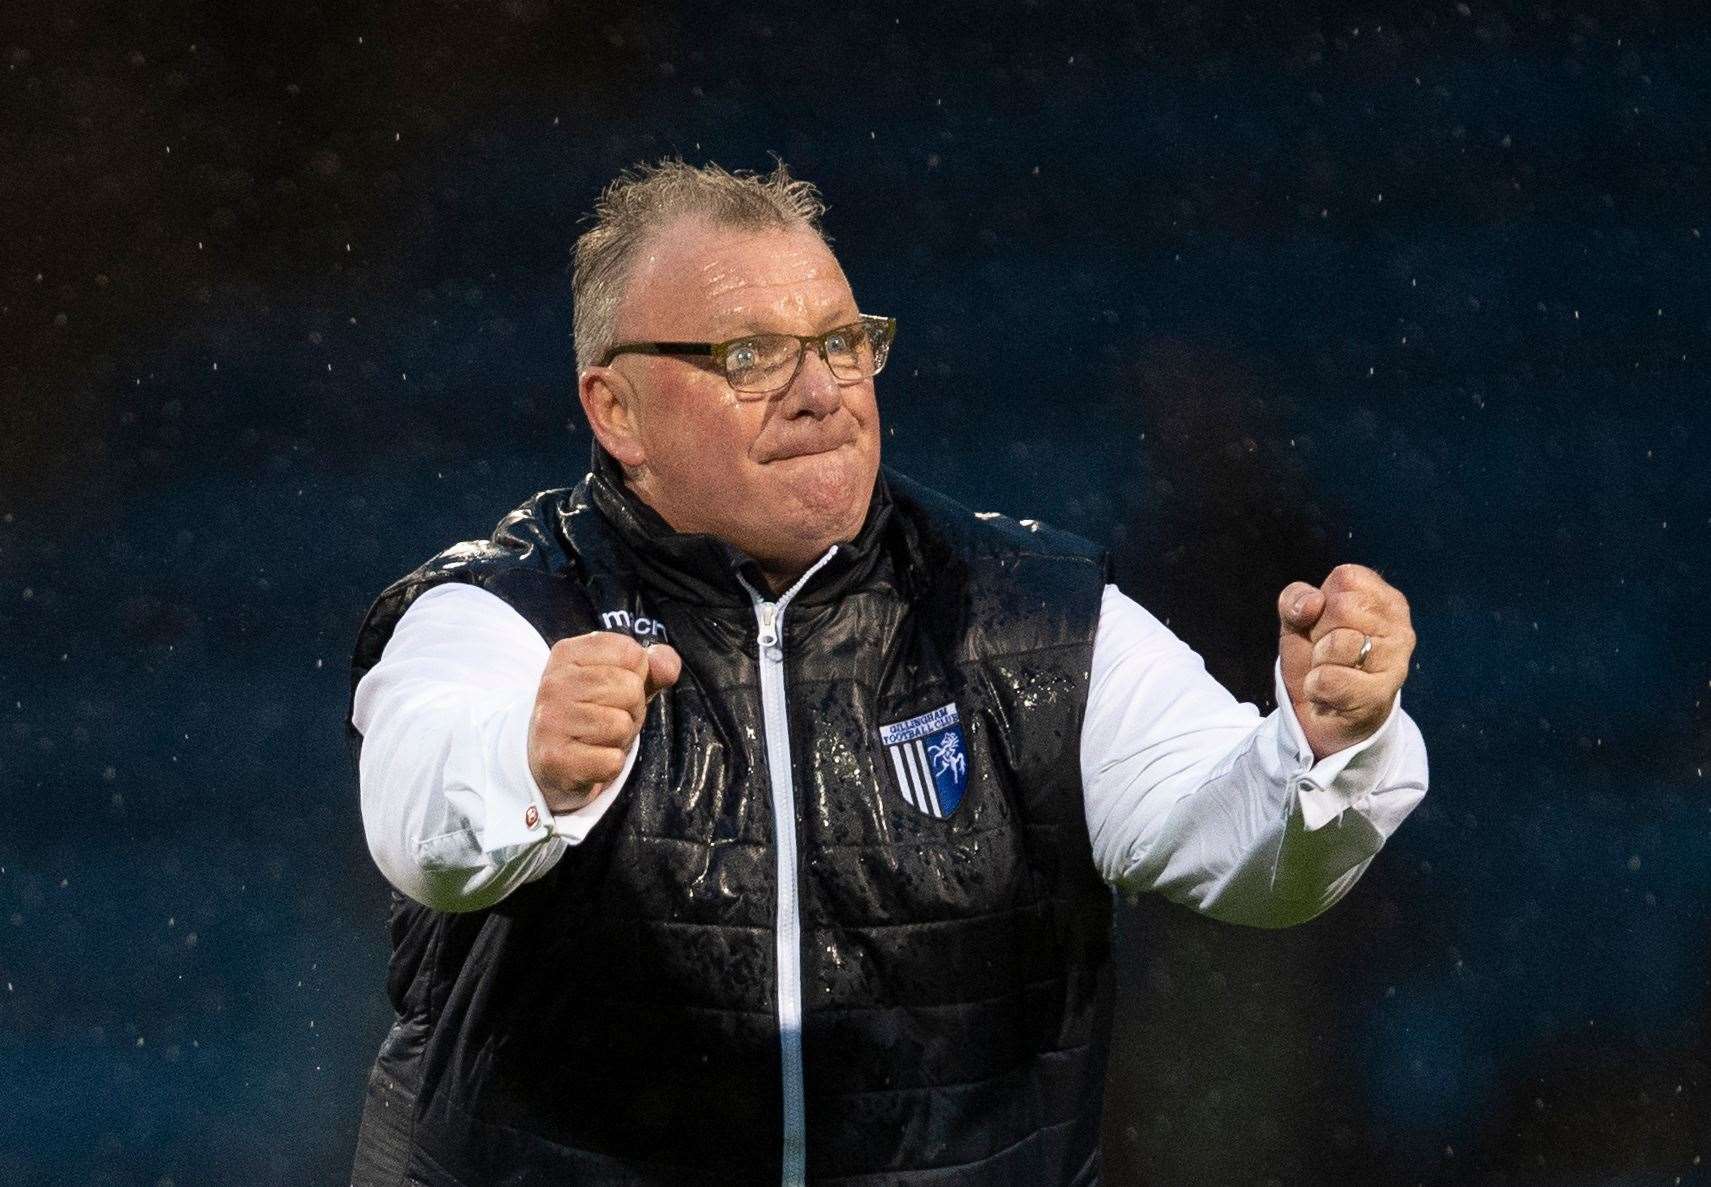 Gillingham boss Steve Evans is determined that his team will be ready for the resumption of league football, whenever that may be